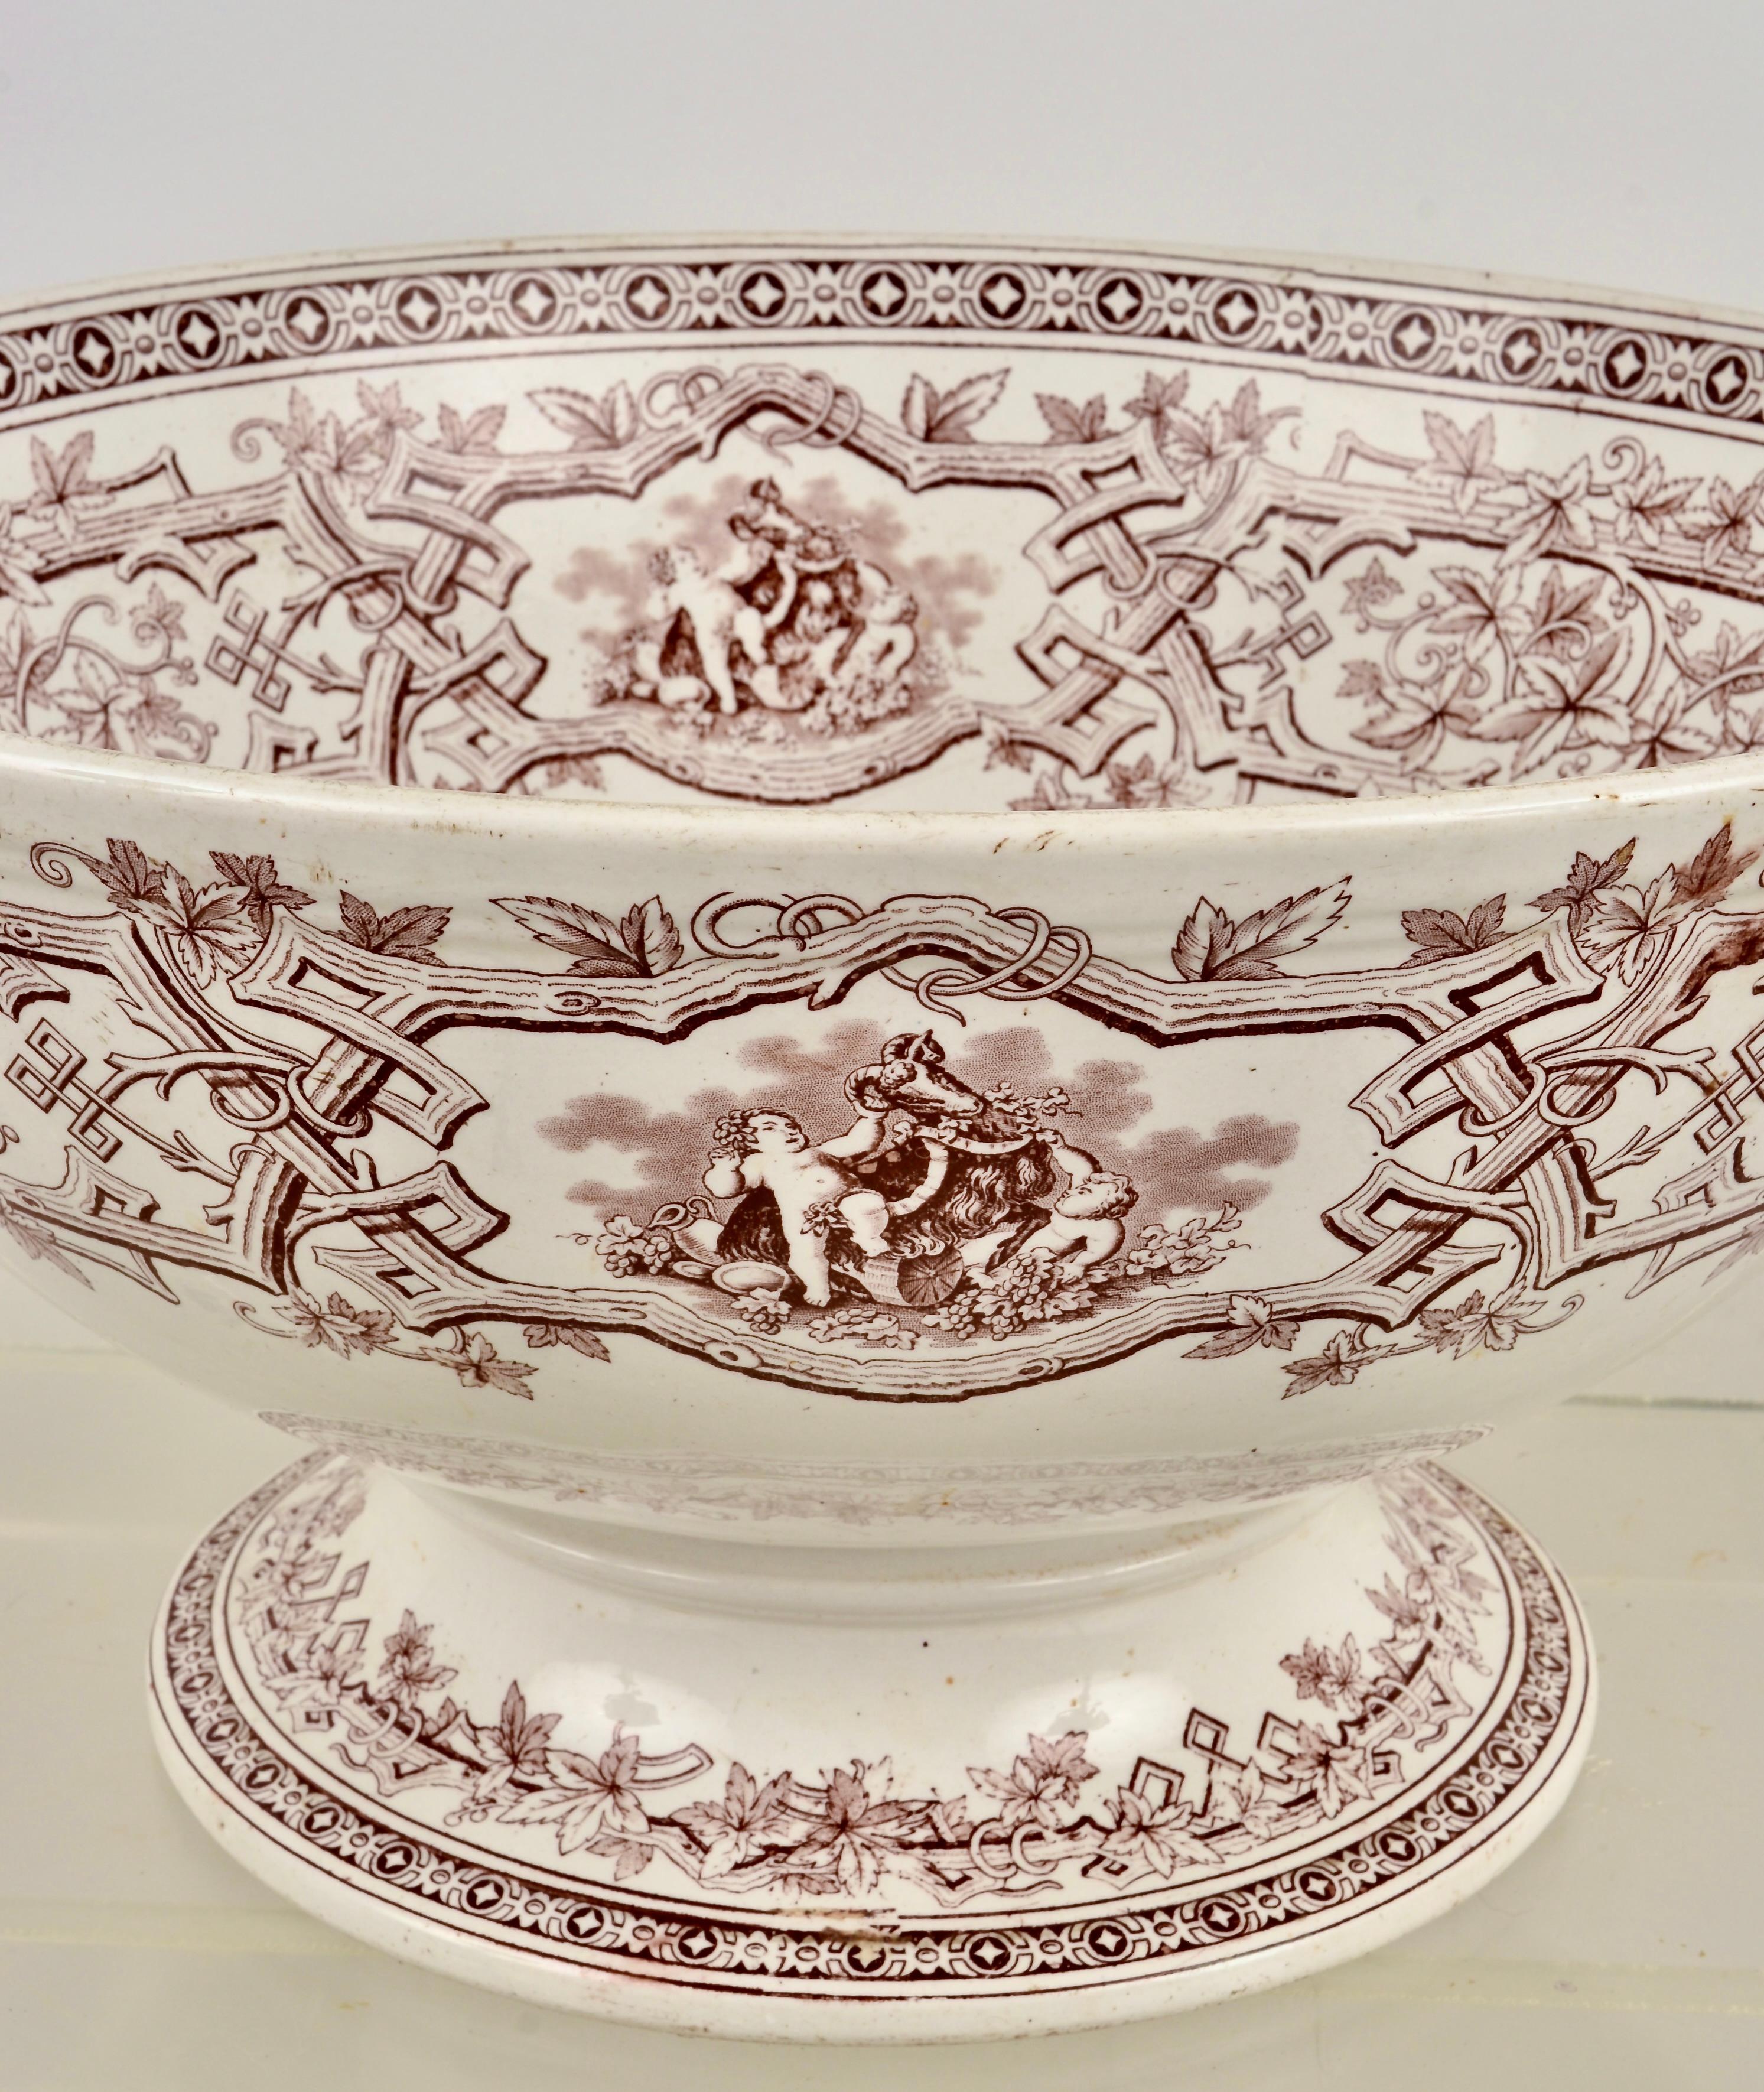 !9th C English Transferware Punch Bowl by Furnival For Sale 4